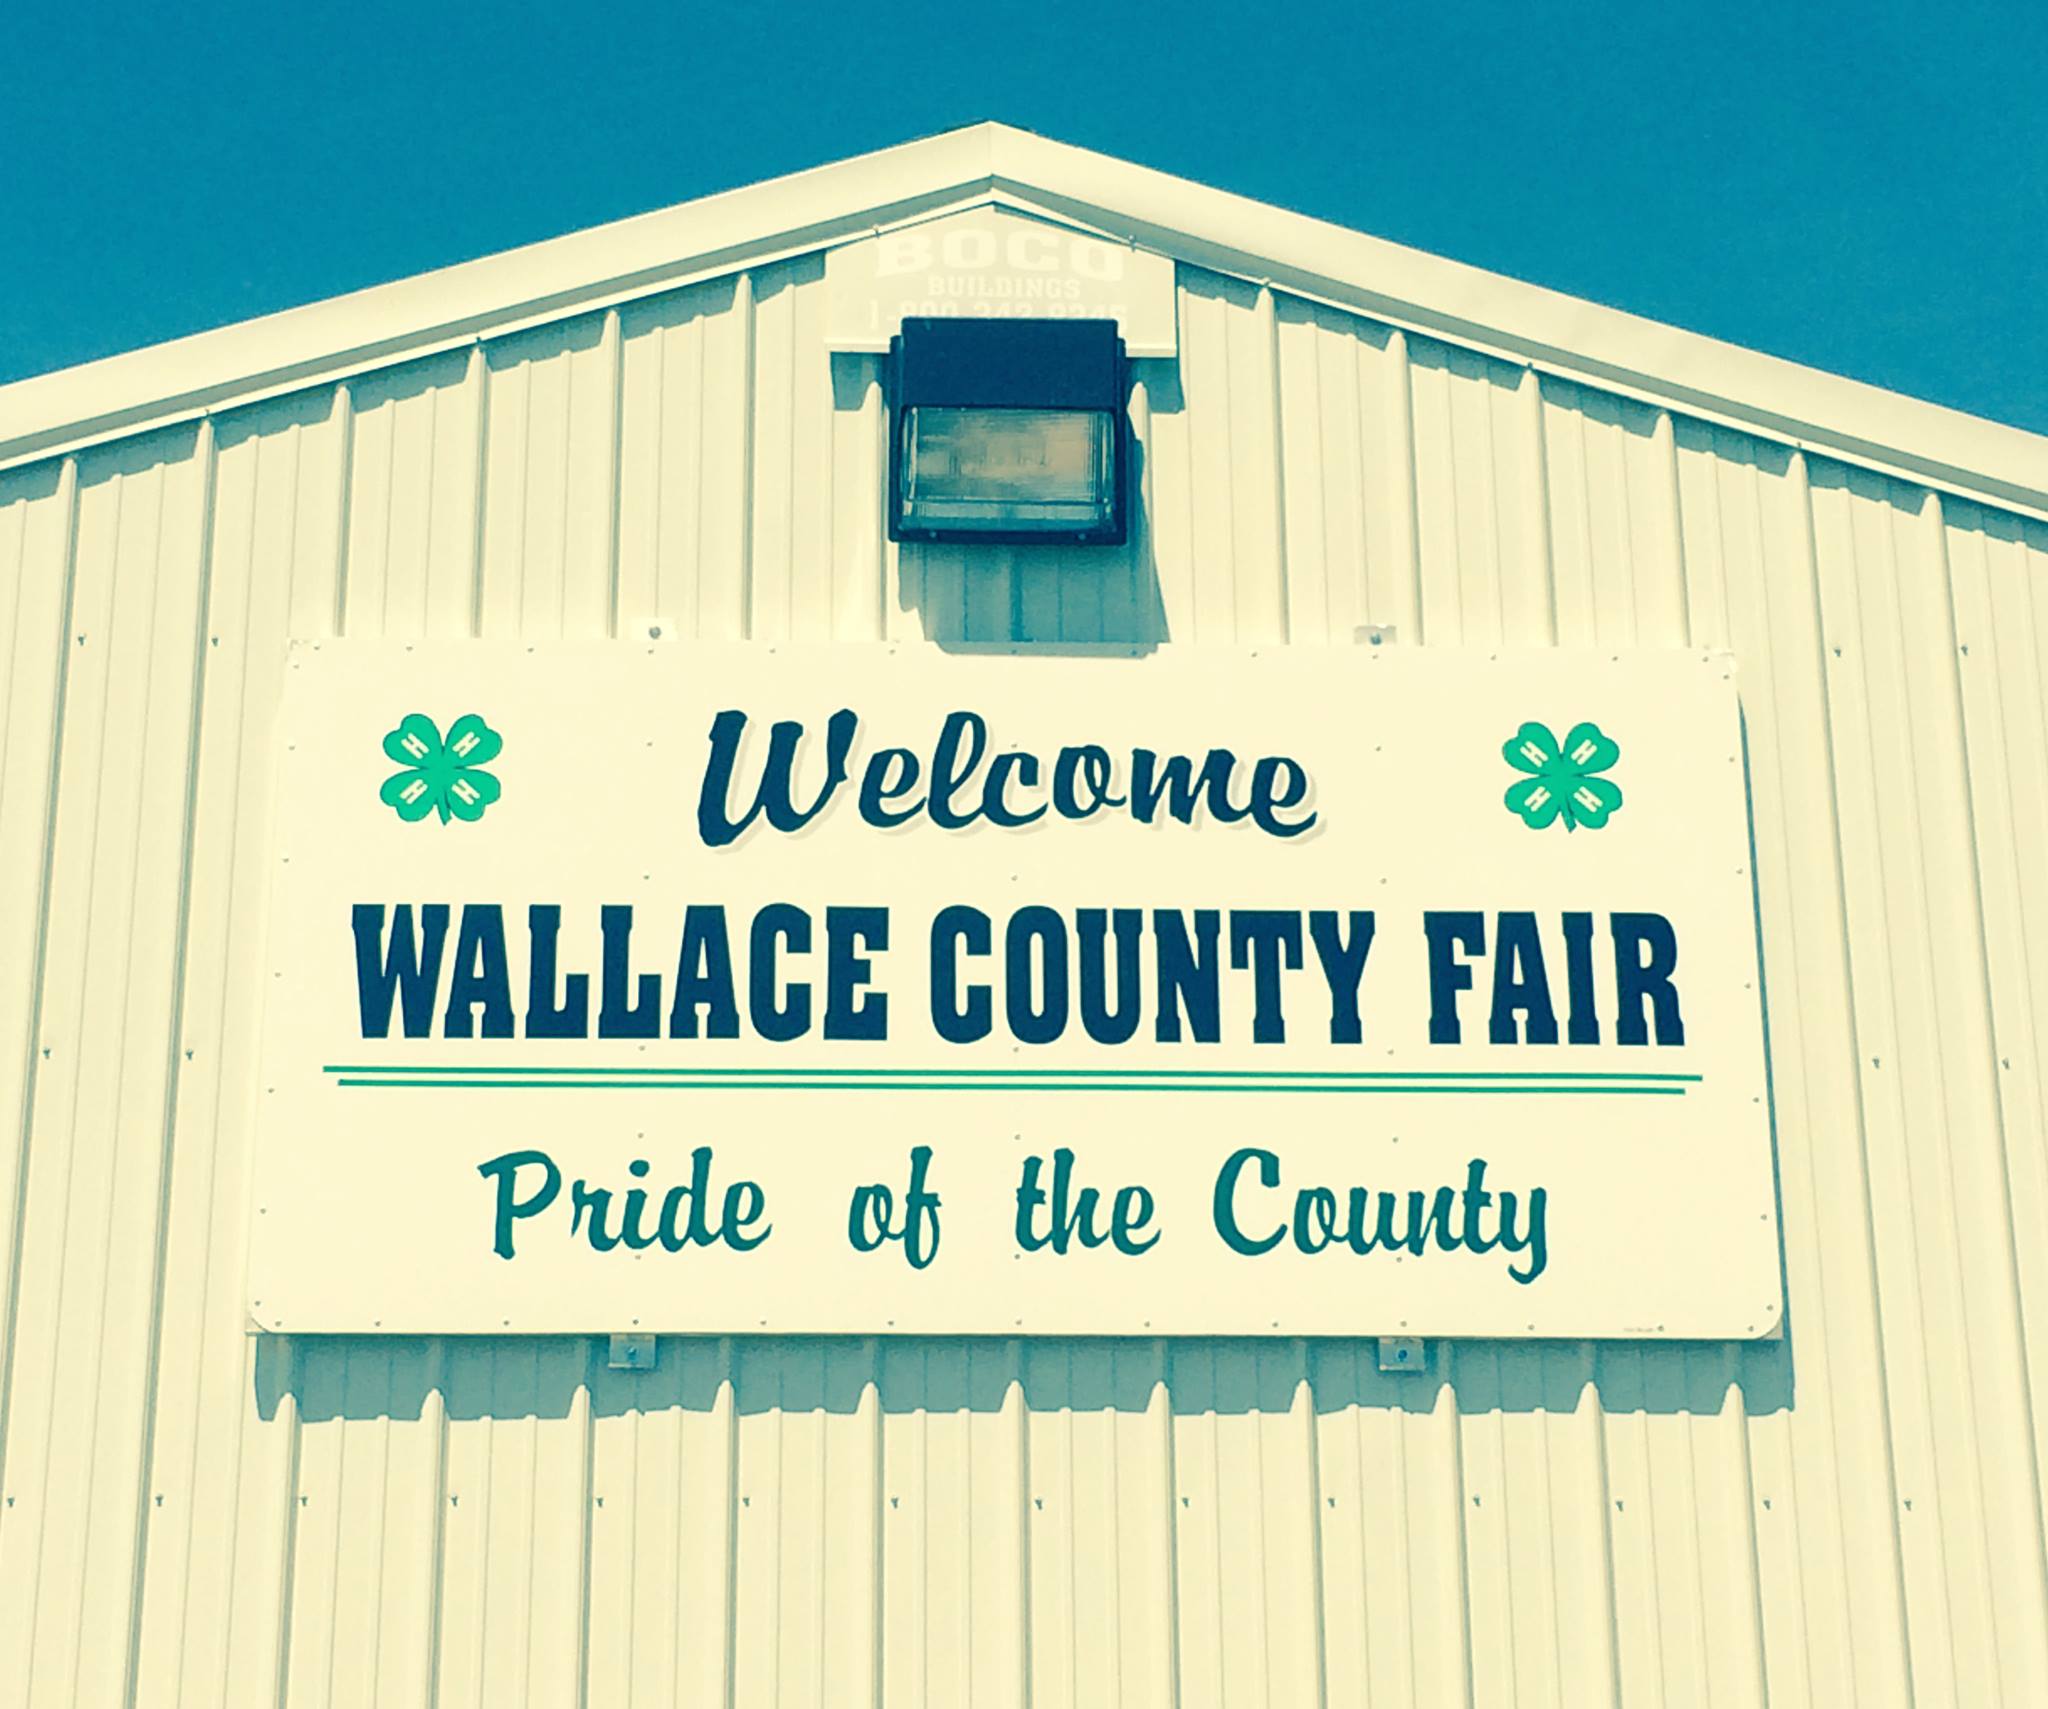 WALLACE COUNTY FAIRGROUNDS Travel Wallace County